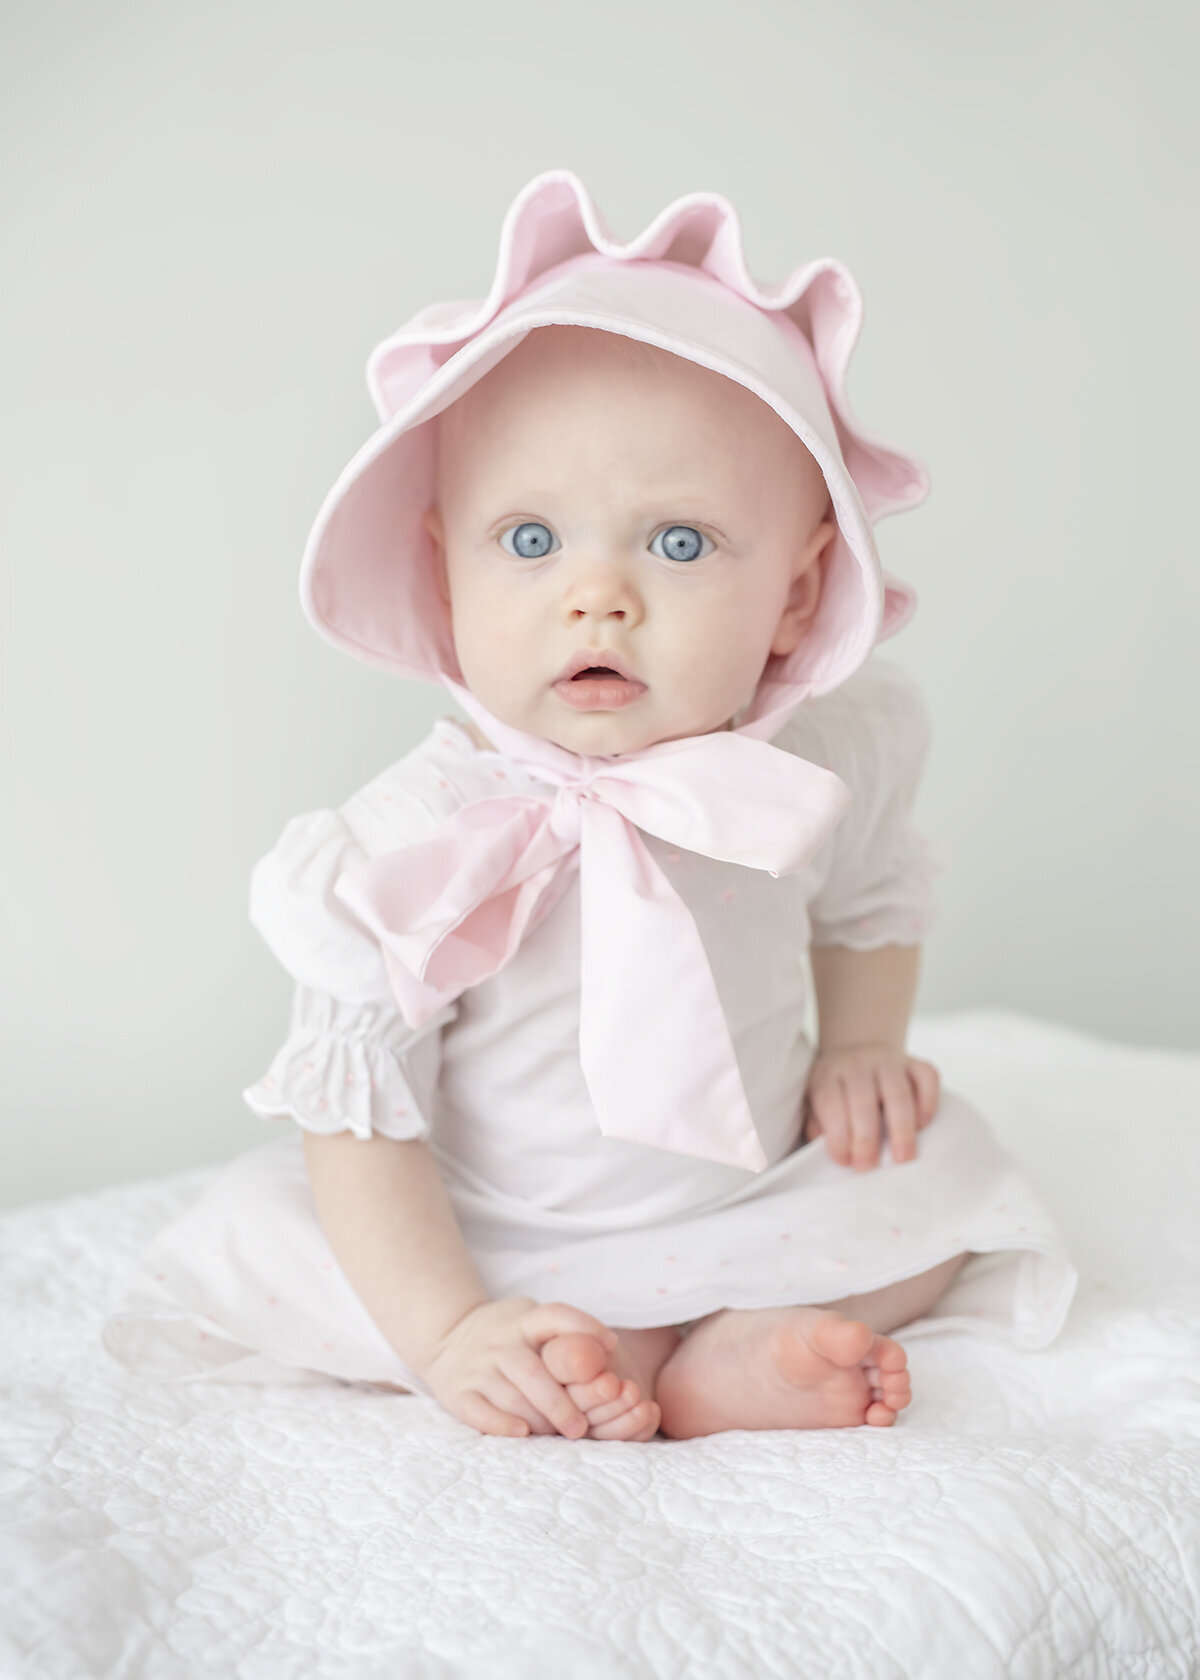 7 month old baby girl photographed wearing a beaufort bonnet hat for her milestone session in studio